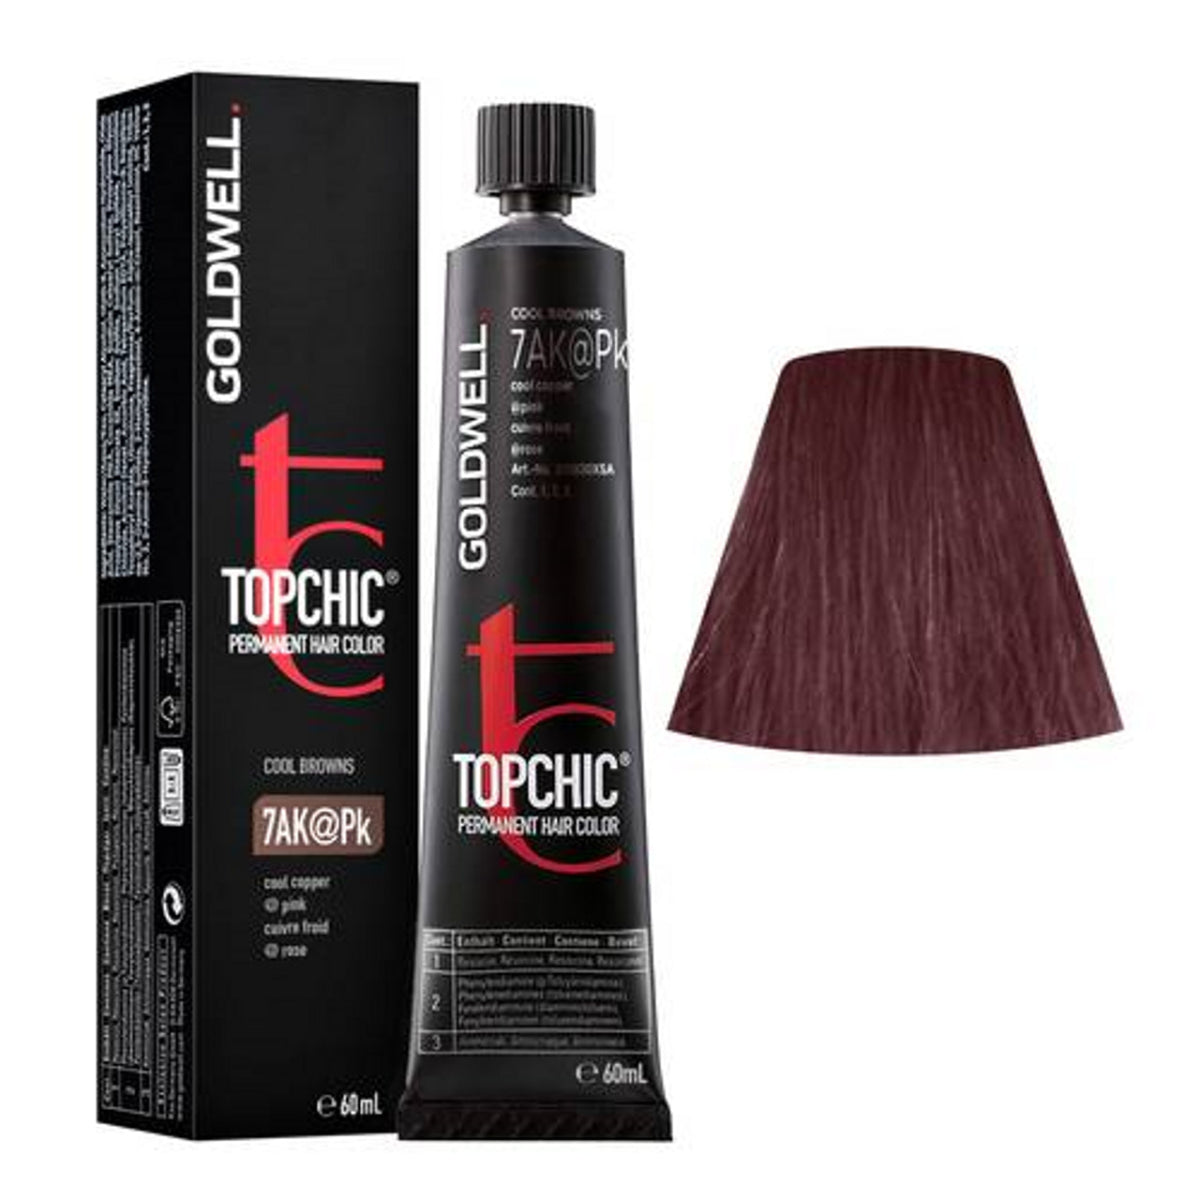 Goldwell Topchic Tube 60ml - MORE COLOURS - Southwestsix Cosmetics Goldwell Topchic Tube 60ml - MORE COLOURS - Hair Dyes Goldwell Southwestsix Cosmetics 7AK@Pk Goldwell Topchic Tube 60ml - MORE COLOURS -